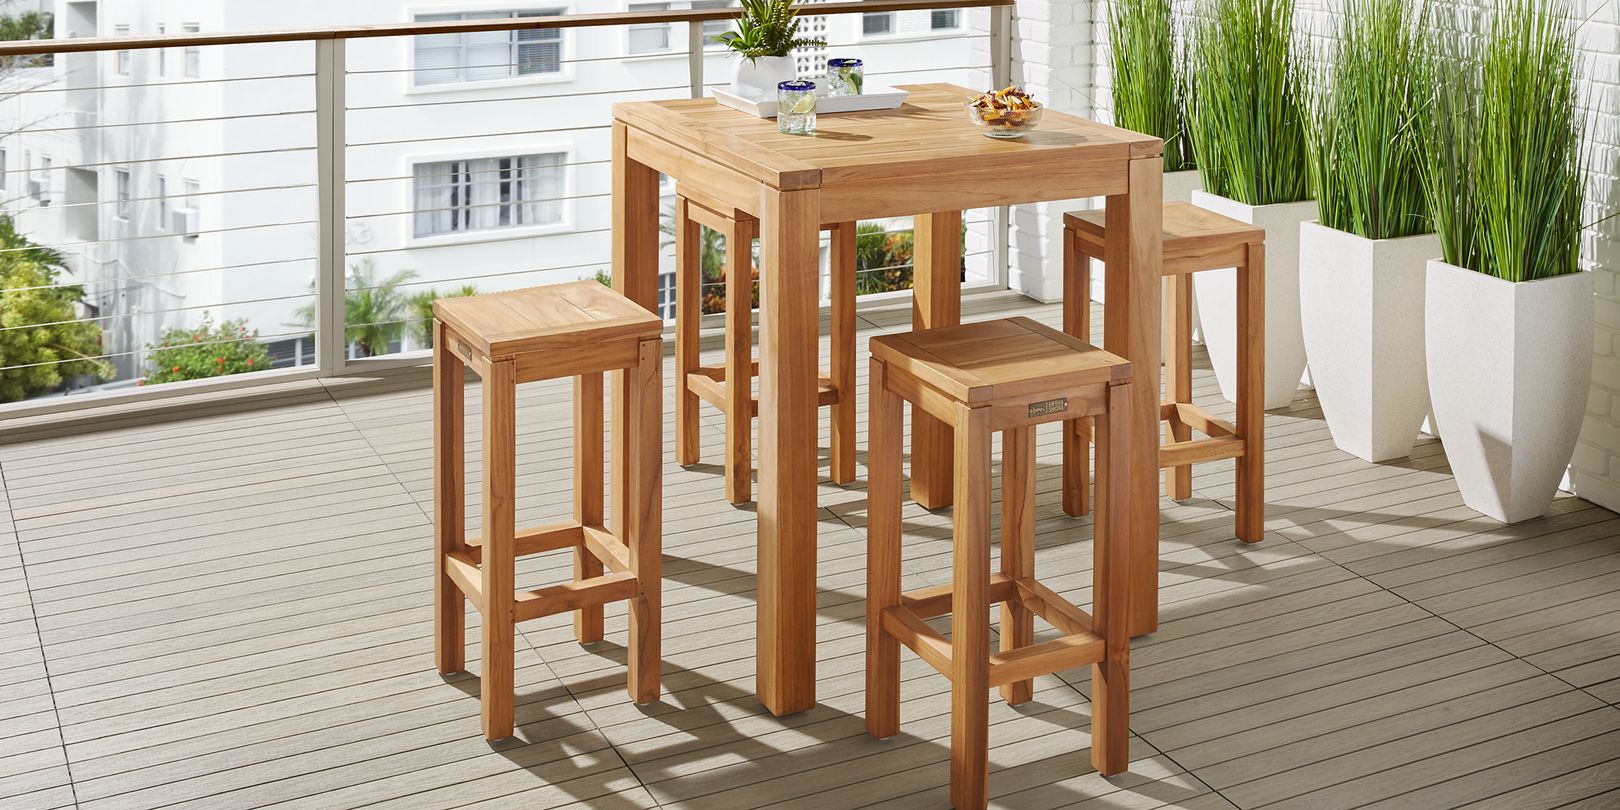 Photo of wooden bar height patio dining set